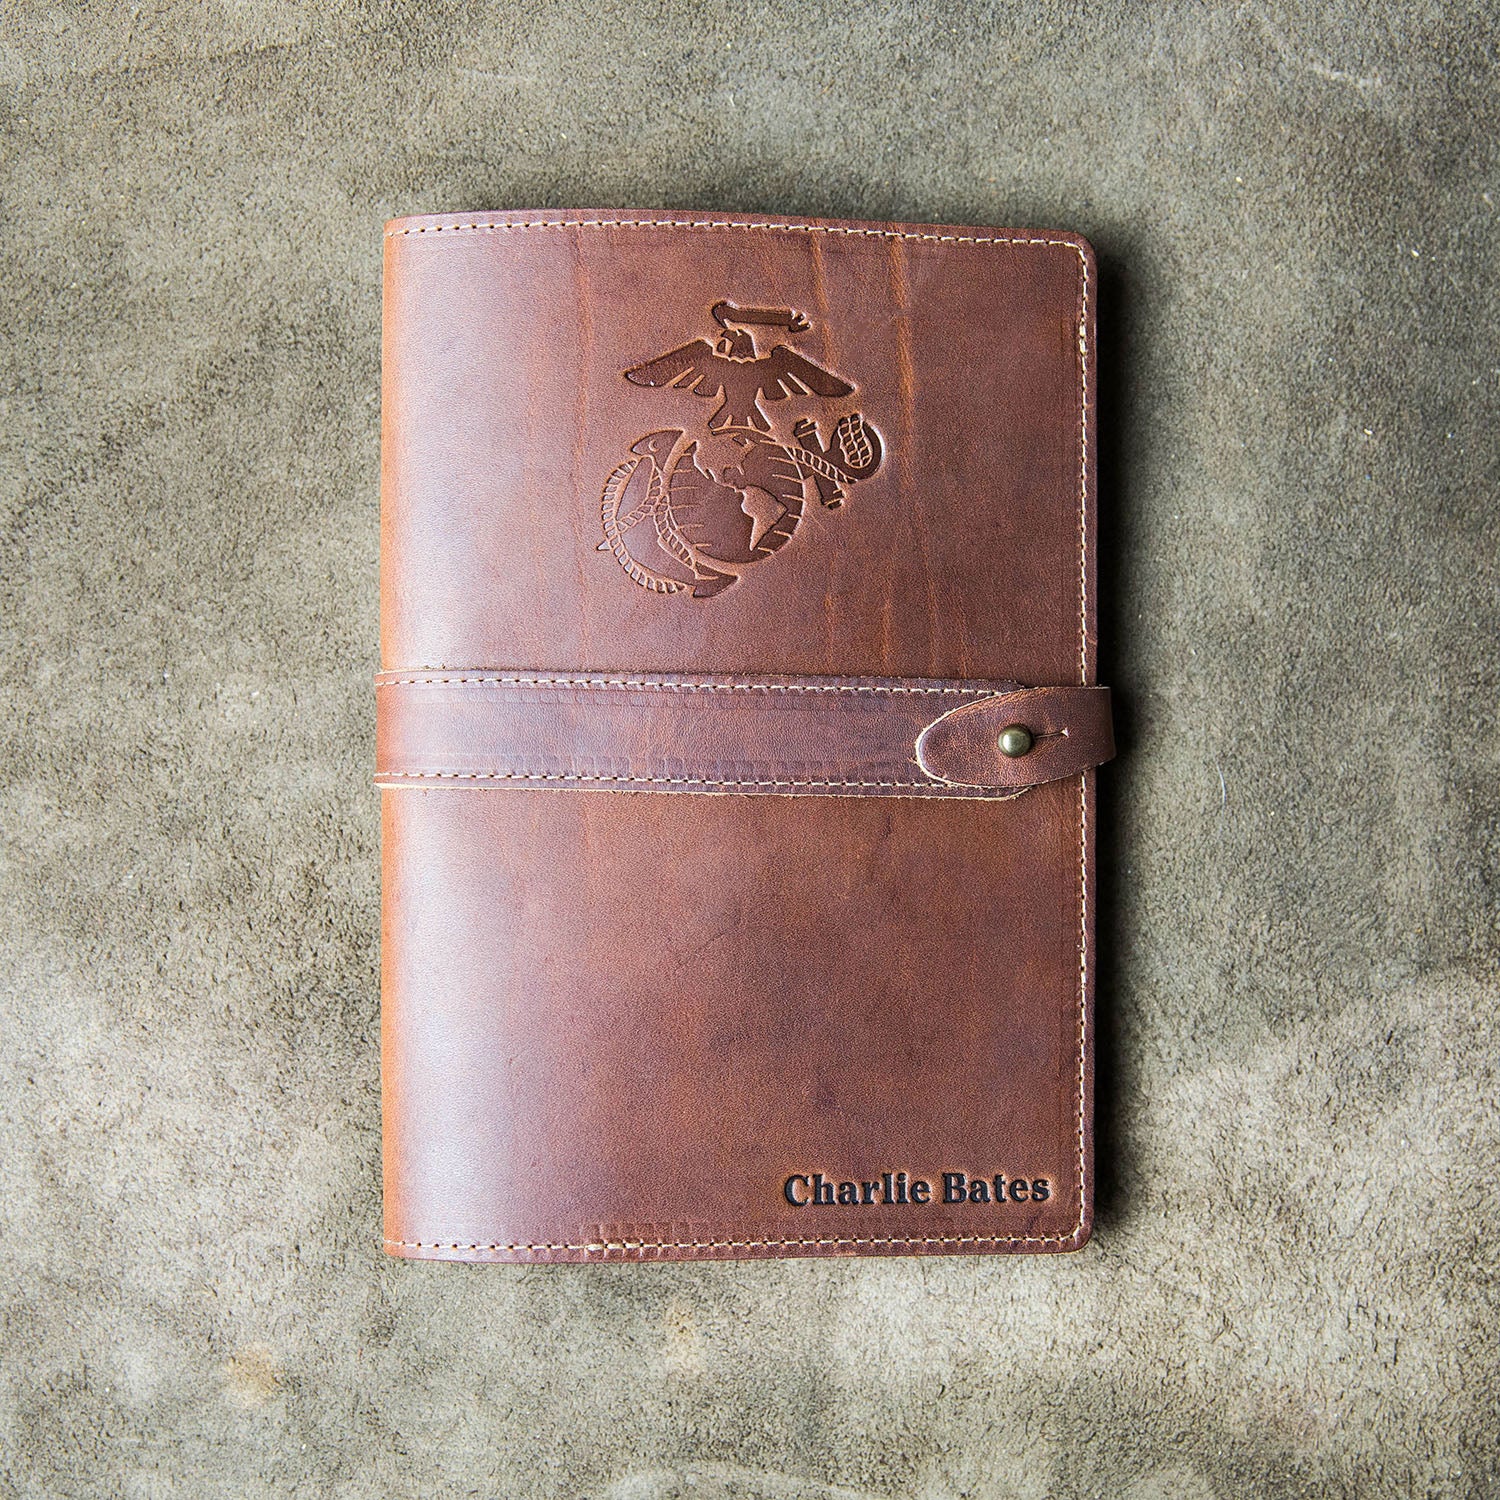 Fine leather A5 moleskin journal cover with personalized name and Marine Corps logo